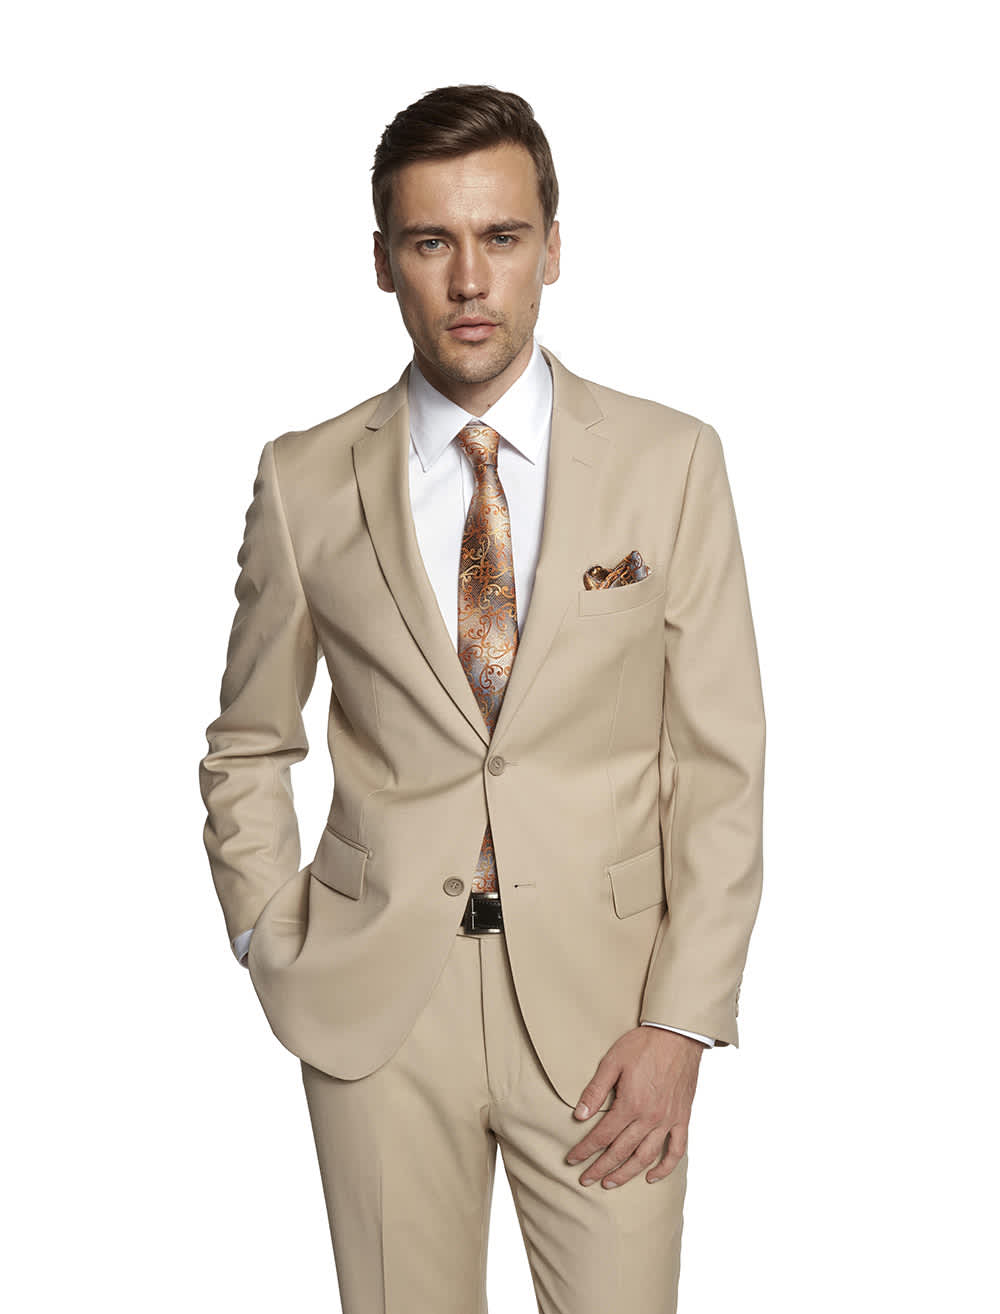 Tuscany Steel Grey Suit – Incognito Menswear, Rochester (Penfield), NY